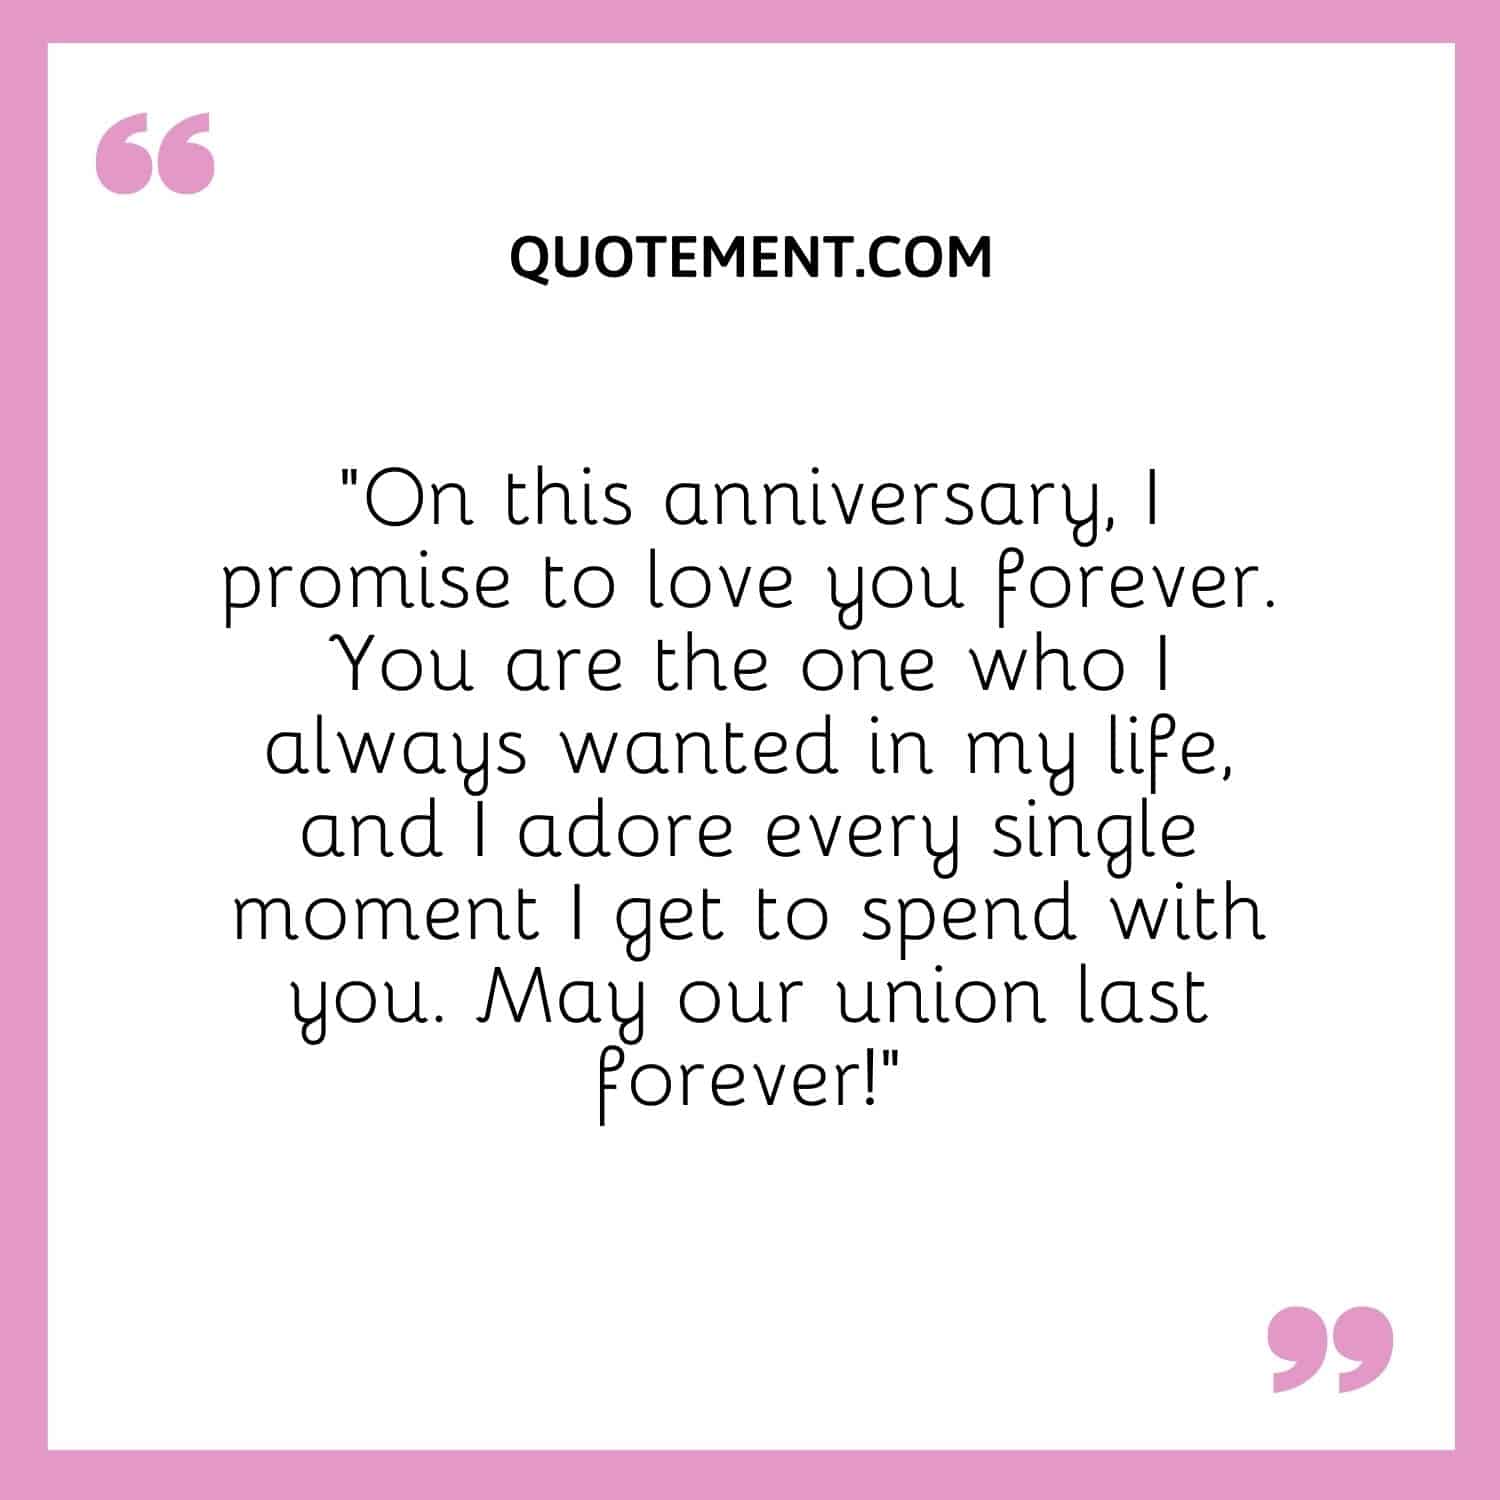 “On this anniversary, I promise to love you forever. You are the one who I always wanted in my life, and I adore every single moment